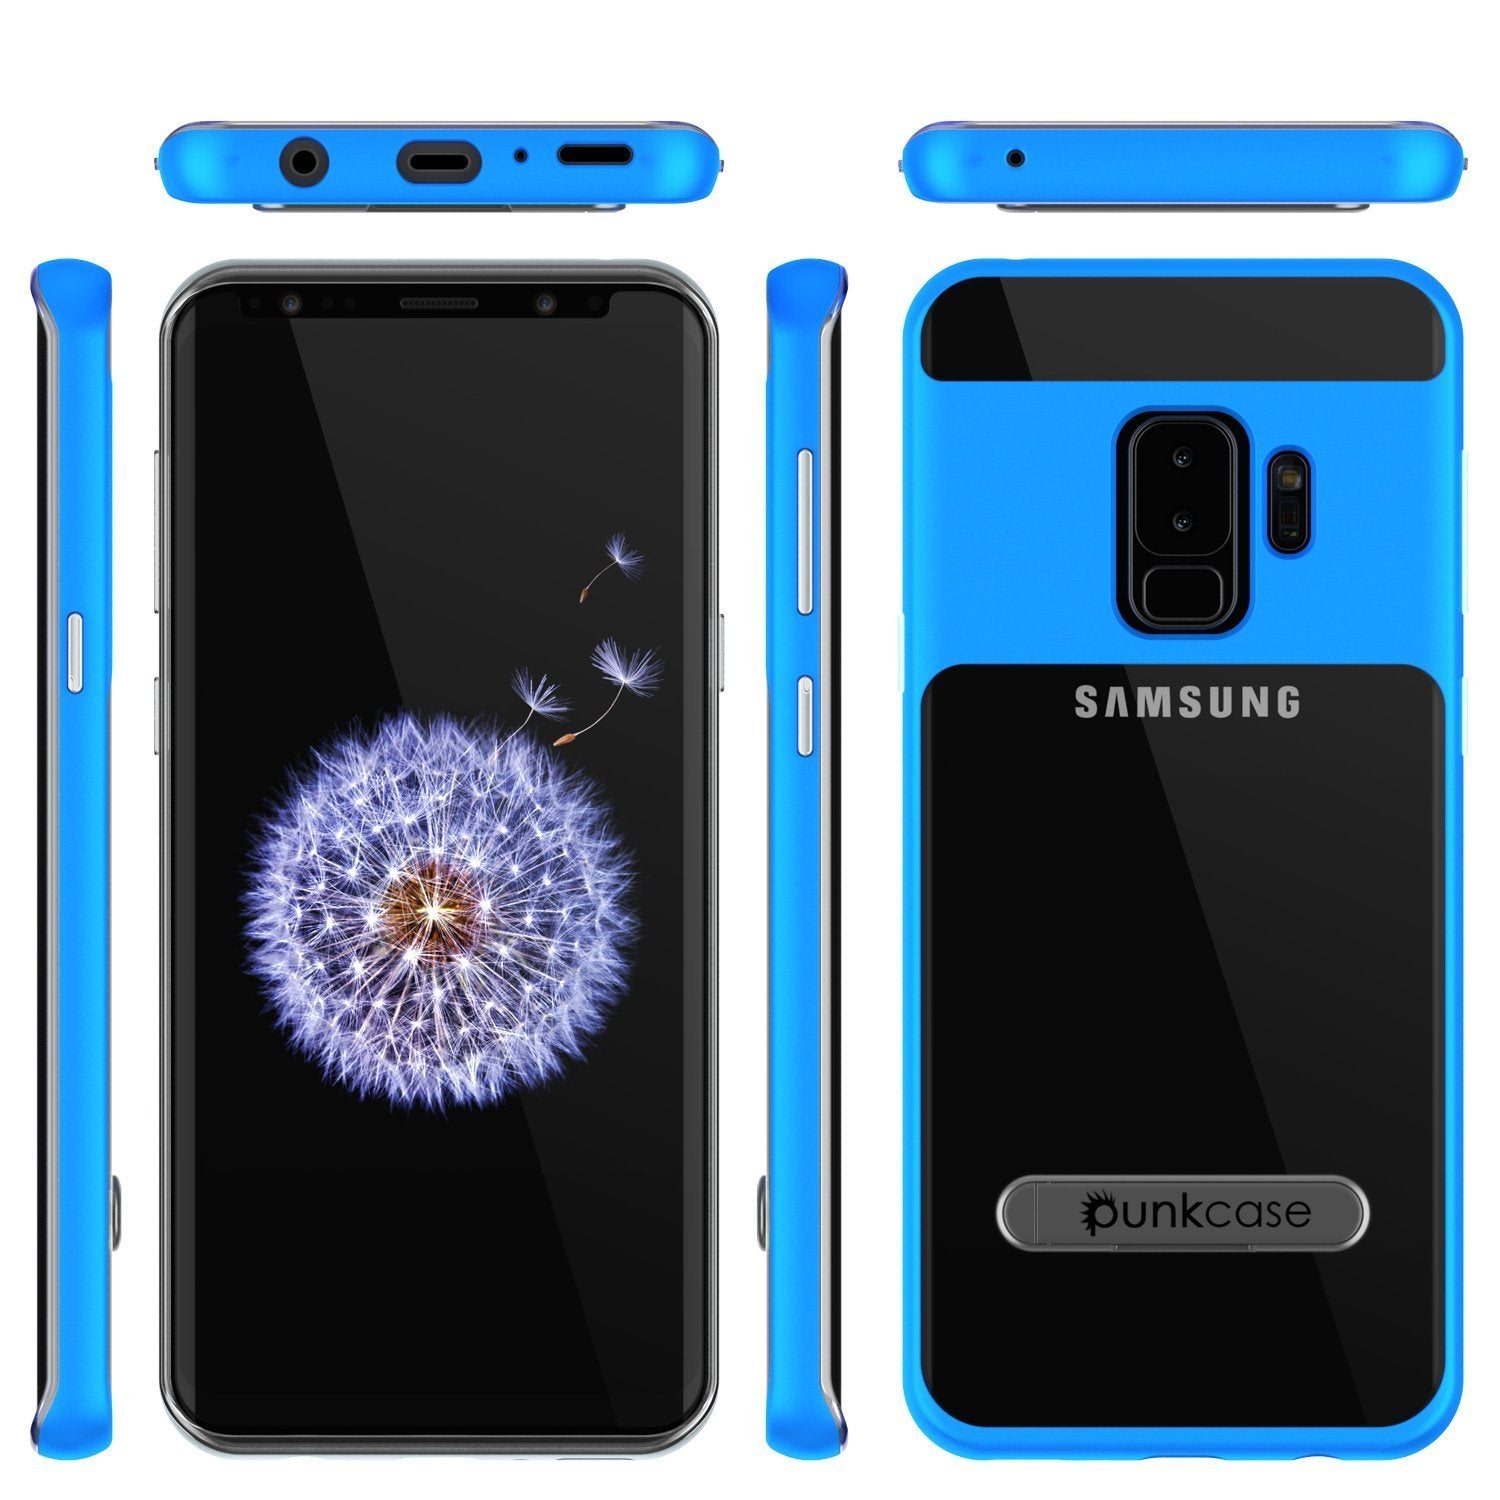 Galaxy S9+ Plus Case, PUNKcase [LUCID 3.0 Series] [Slim Fit] [Clear Back] Armor Cover w/ Integrated Kickstand, Anti-Shock System & PUNKSHIELD Screen Protector for Samsung Galaxy S9+ Plus [Blue]